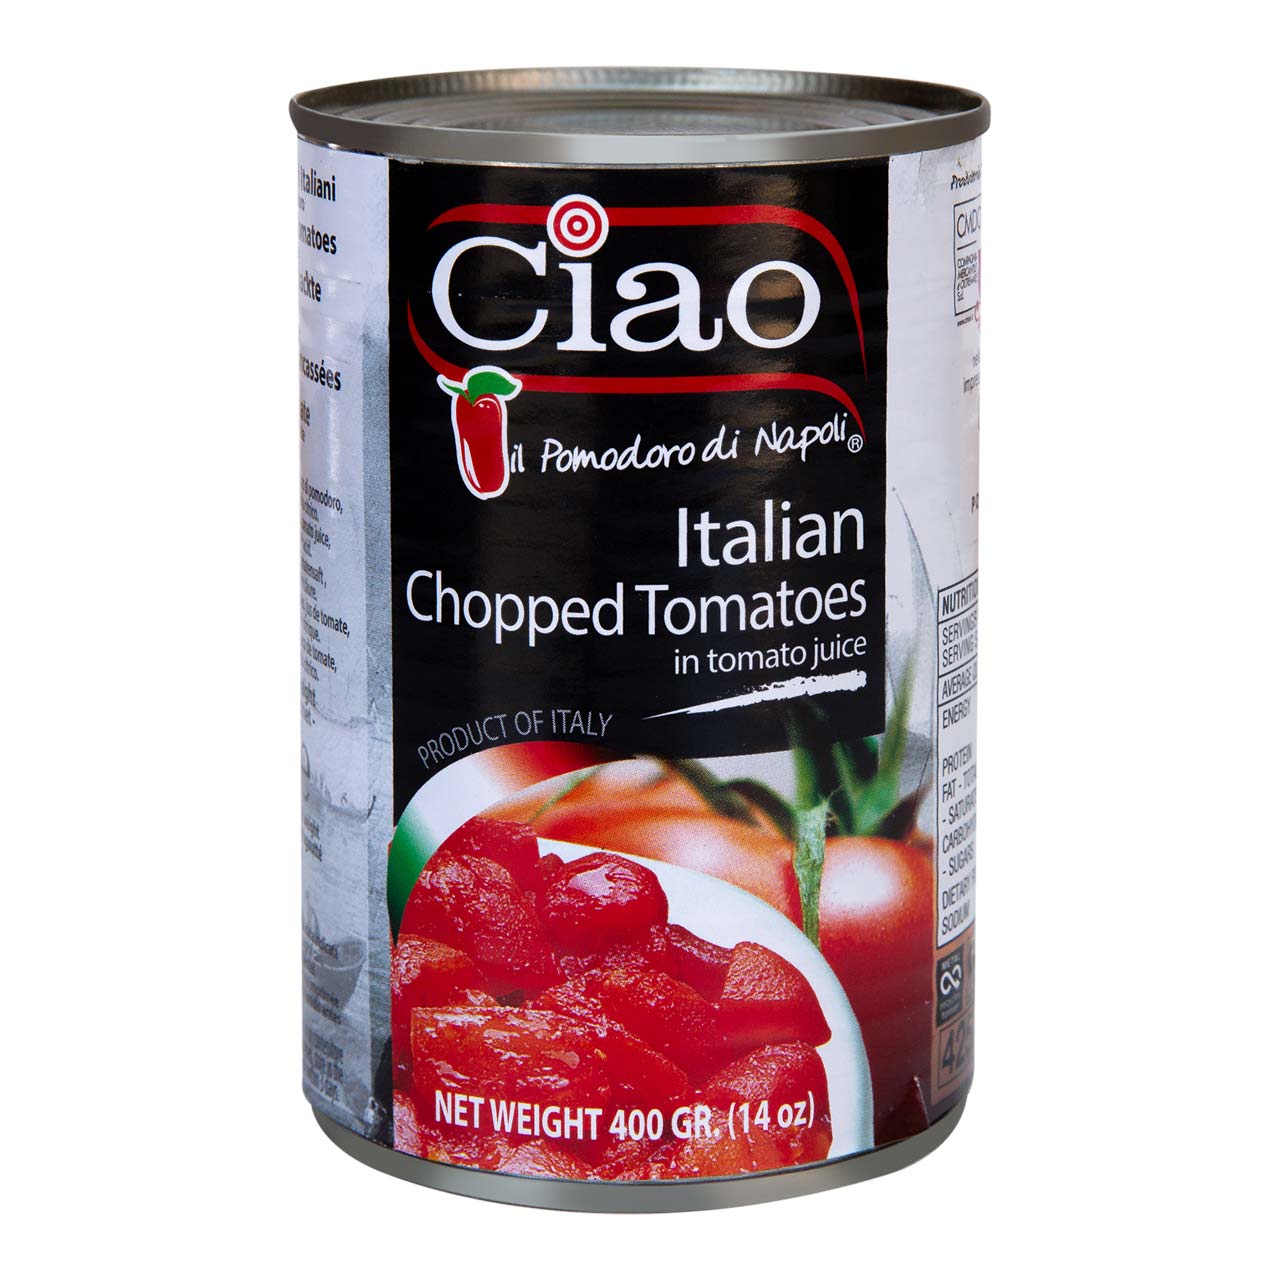 Ciao-Chopped-Tomatoes-400g-front